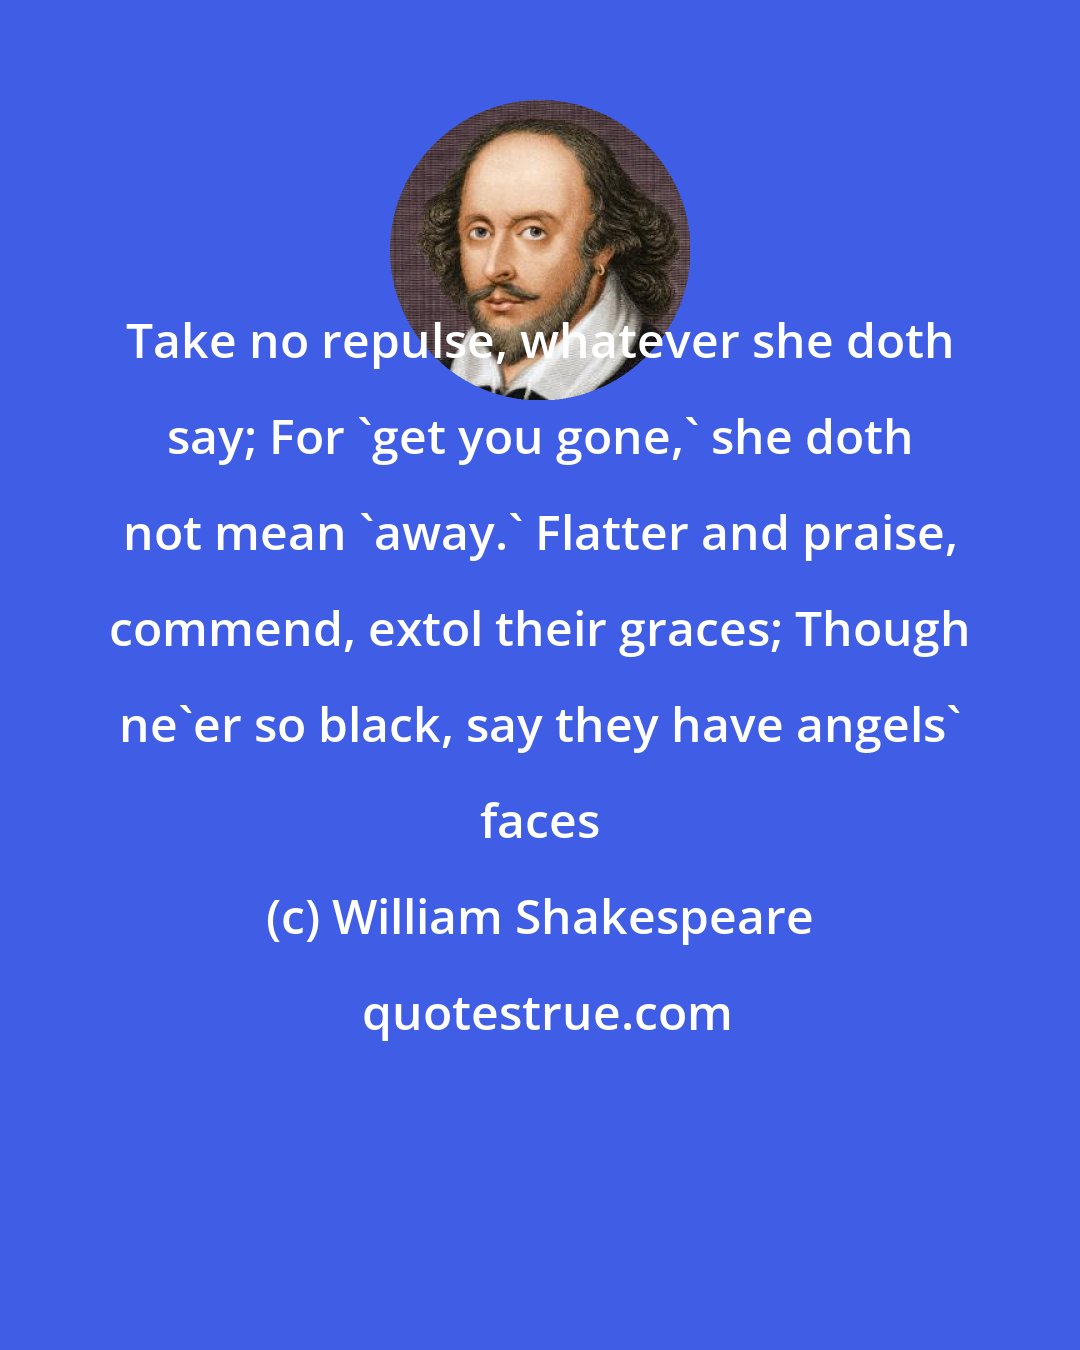 William Shakespeare: Take no repulse, whatever she doth say; For 'get you gone,' she doth not mean 'away.' Flatter and praise, commend, extol their graces; Though ne'er so black, say they have angels' faces